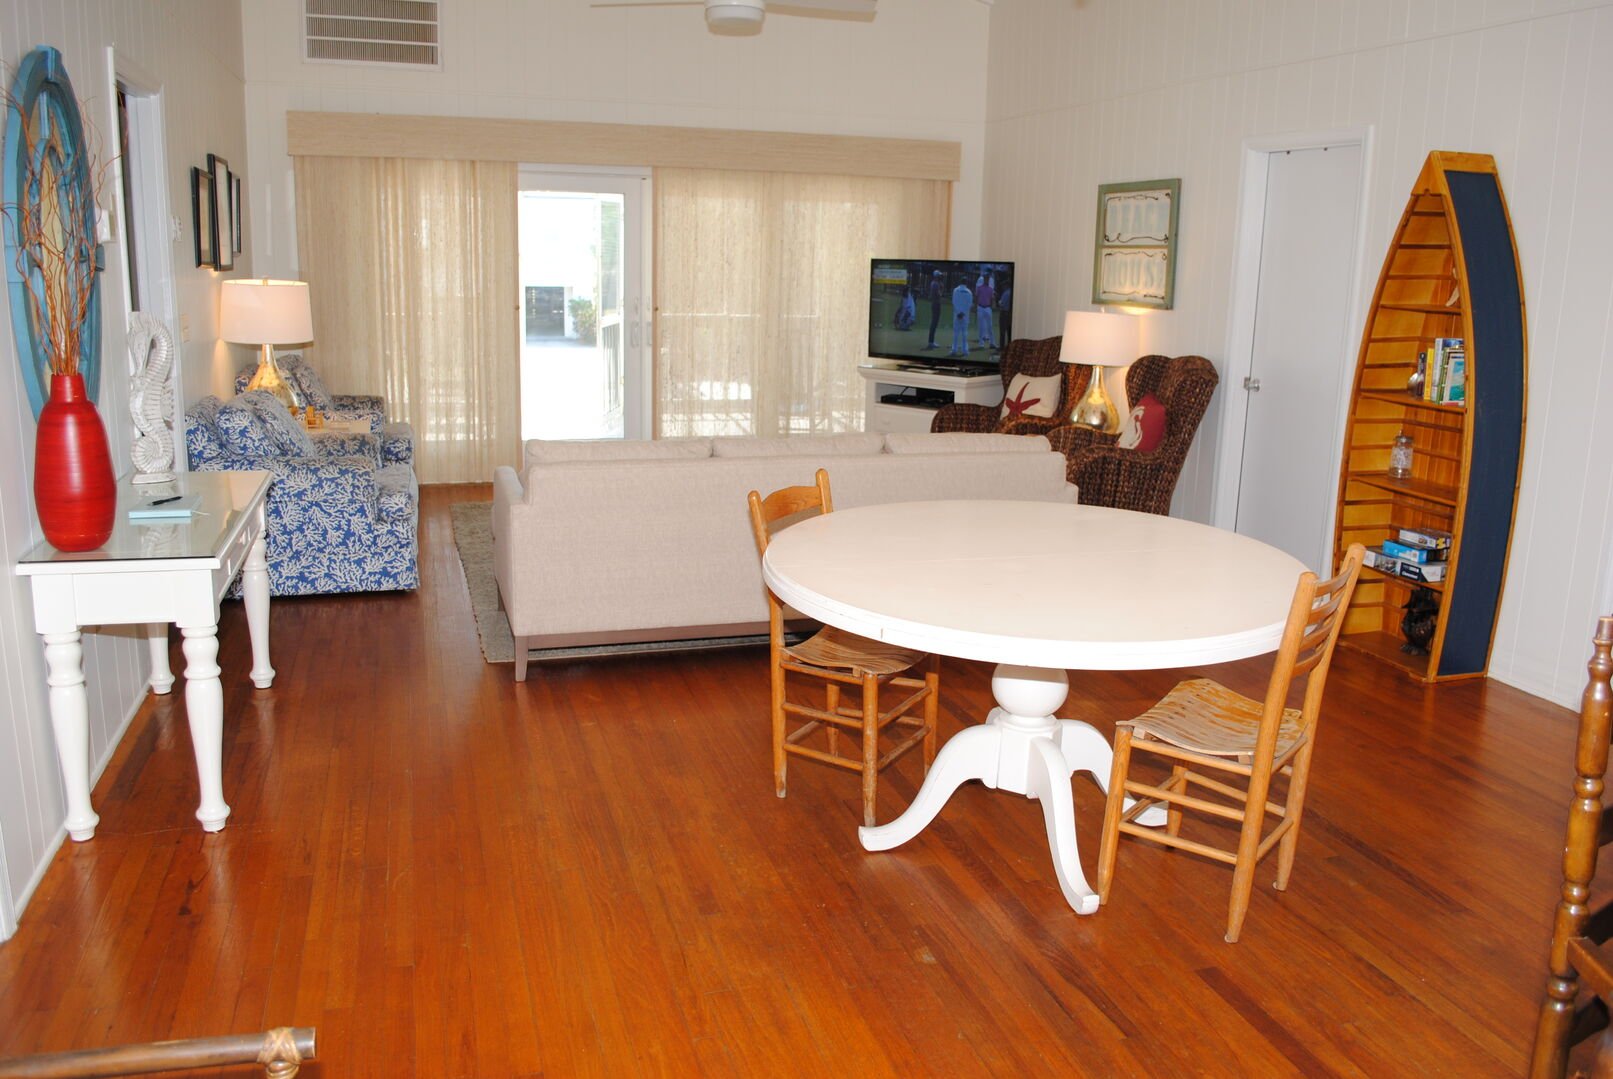 Living Area and Card Table